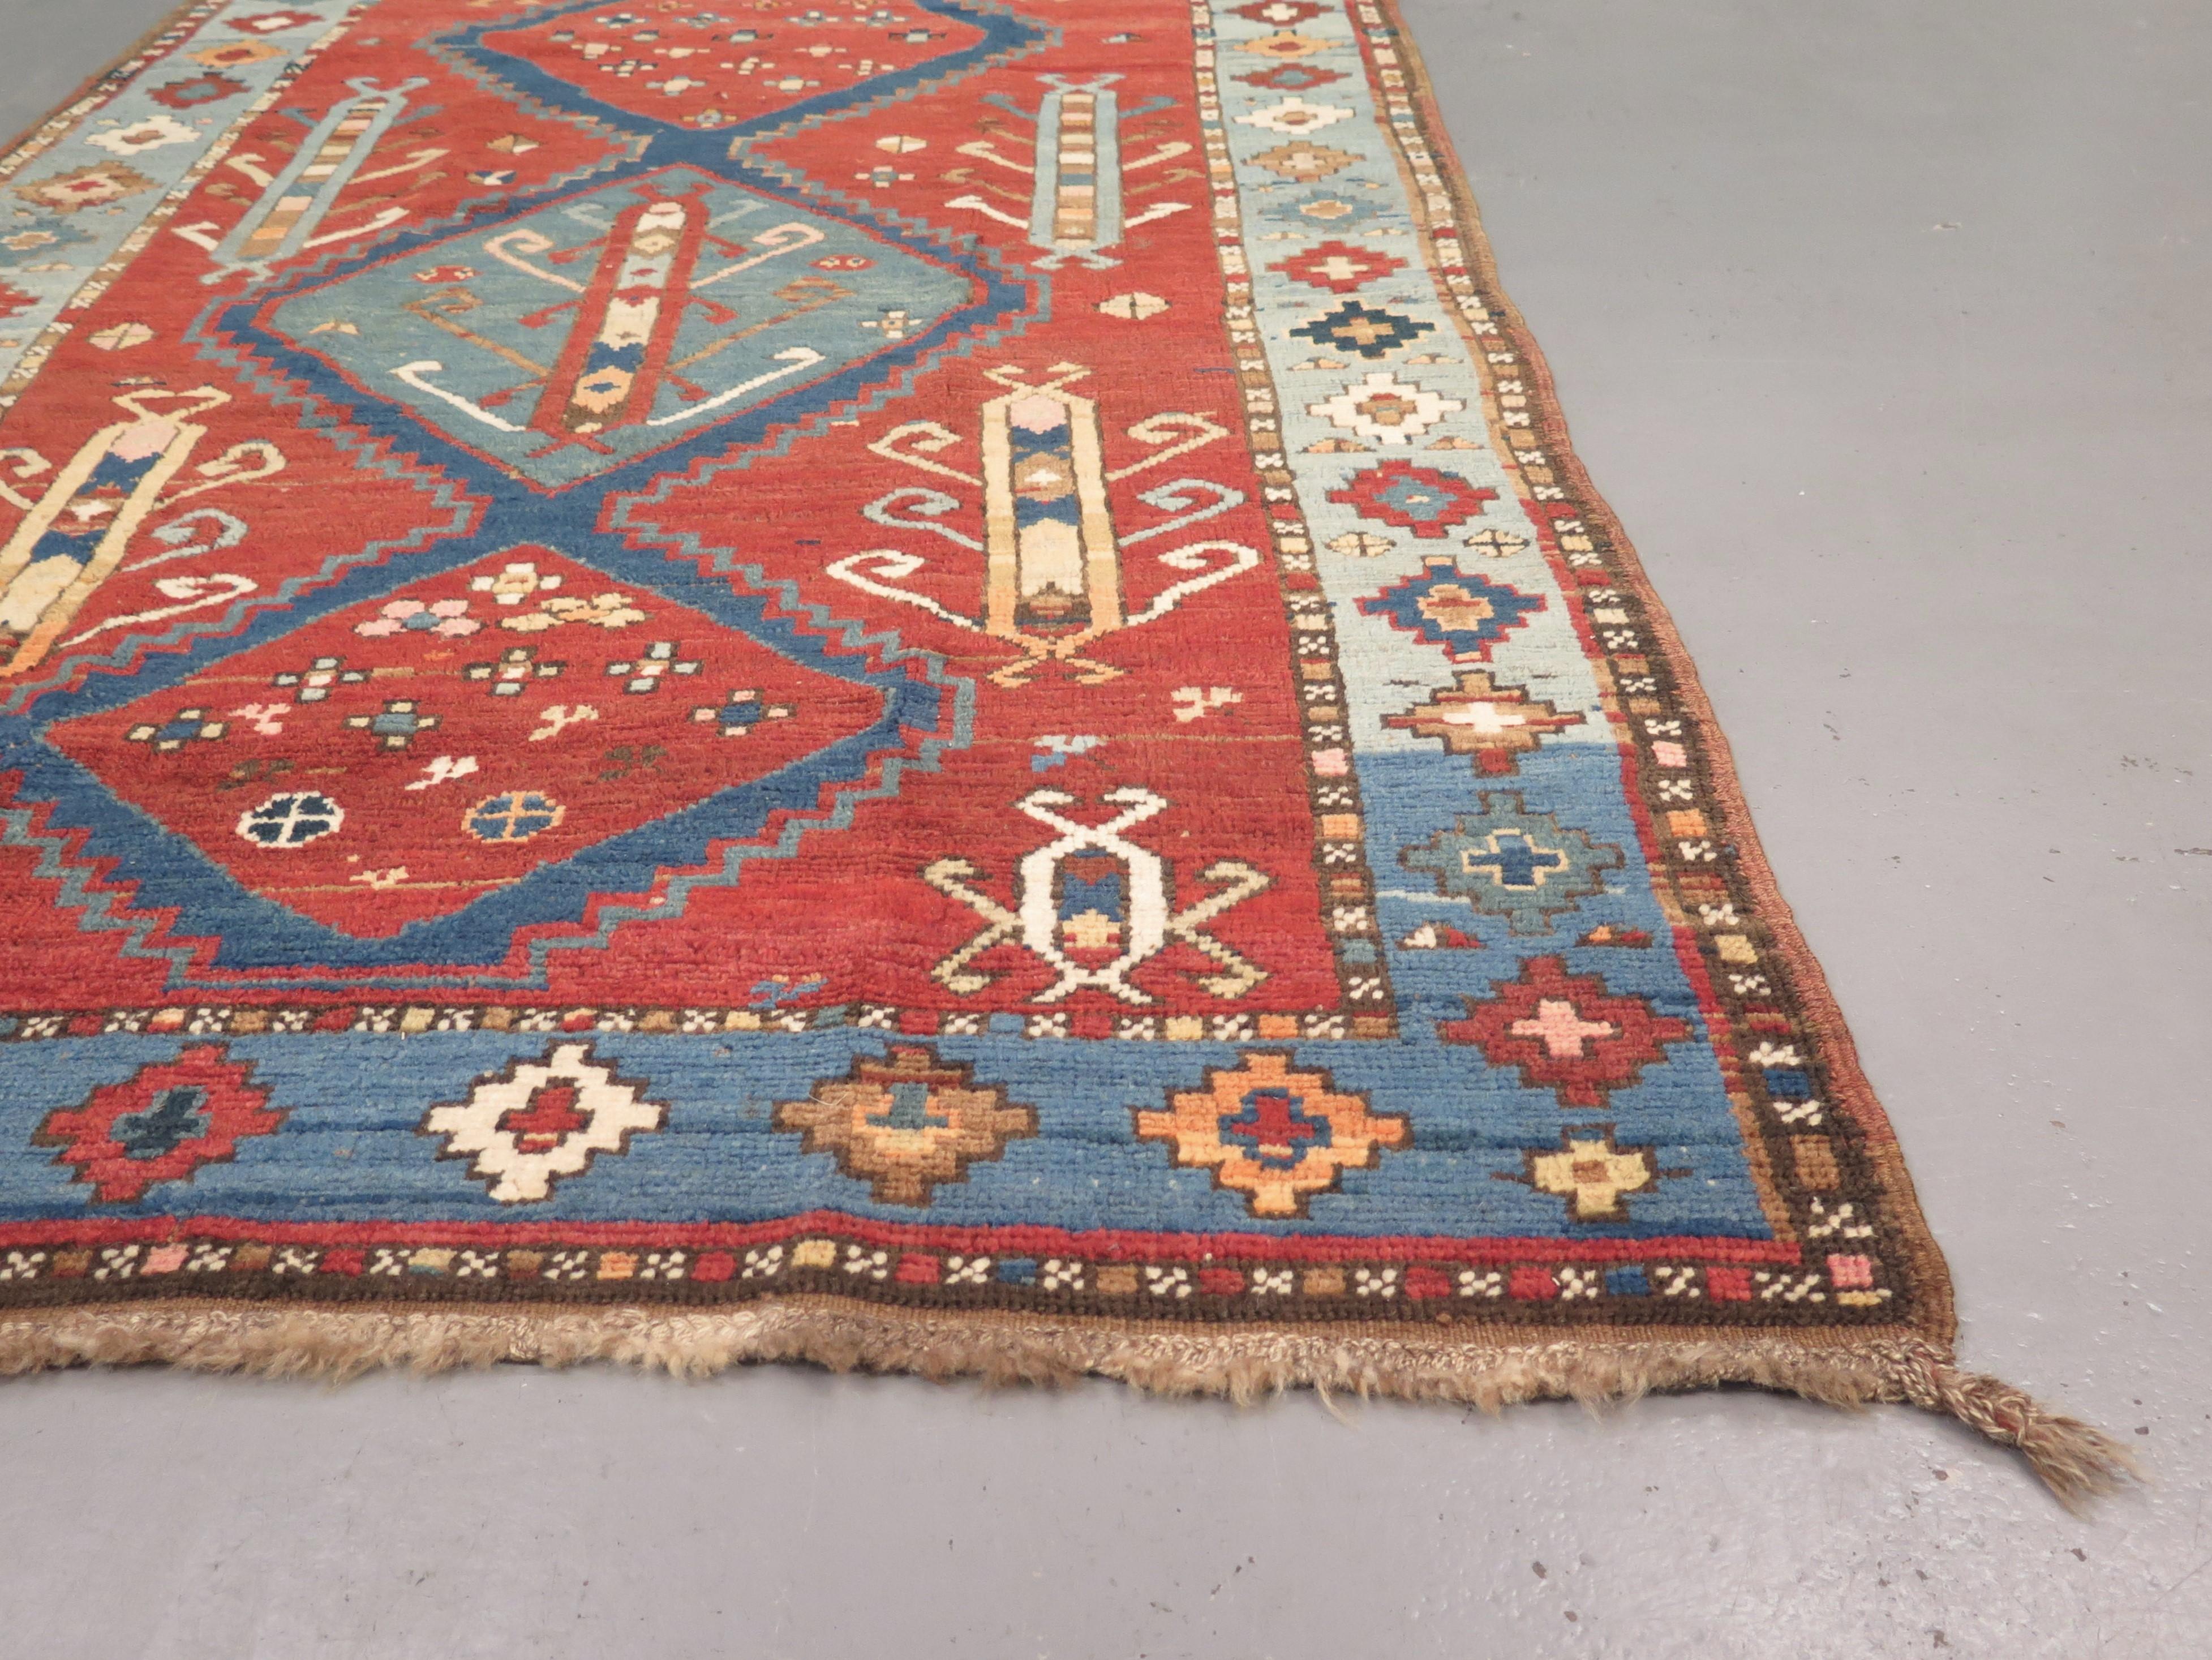 Antique Kazak Accent Rug, 1890-1910 In Good Condition For Sale In London, GB